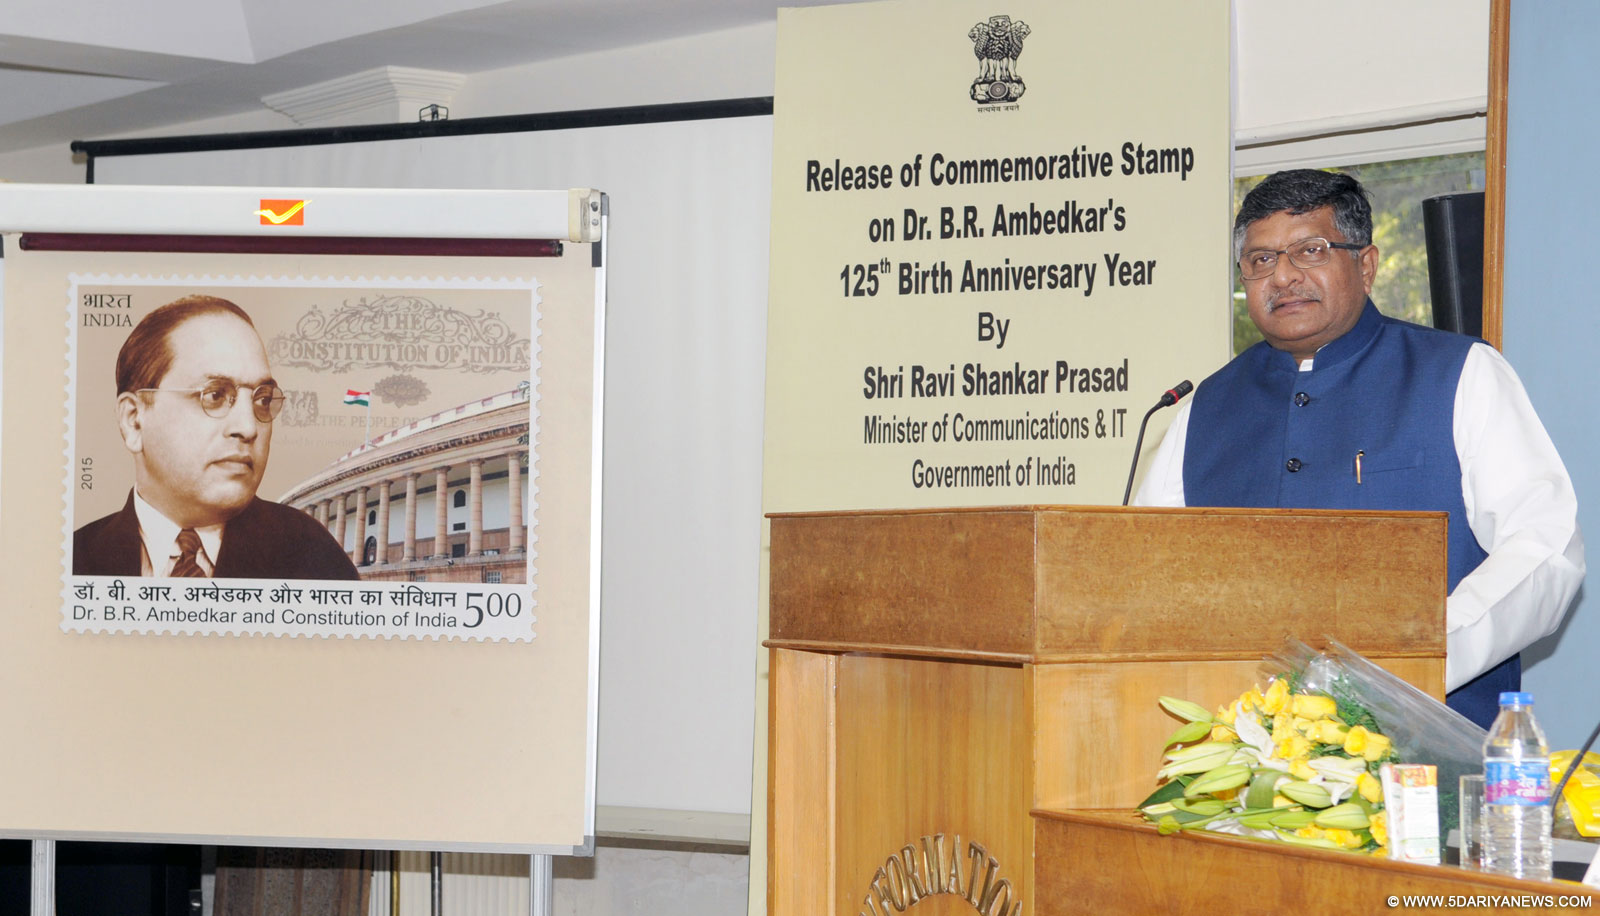 The Union Minister for Communications & Information Technology, Shri Ravi Shankar Prasad releasing the Commemorative Postal Stamp on Dr. B.R. Ambedkar’s 125th Birth Anniversary Year, in New Delhi on September 30, 2015. The Union Minister for Social Justice and Empowerment, Shri Thaawar Chand Gehlot and the Minister of State for Social Justice & Empowerment, Shri Vijay Sampla are also seen.